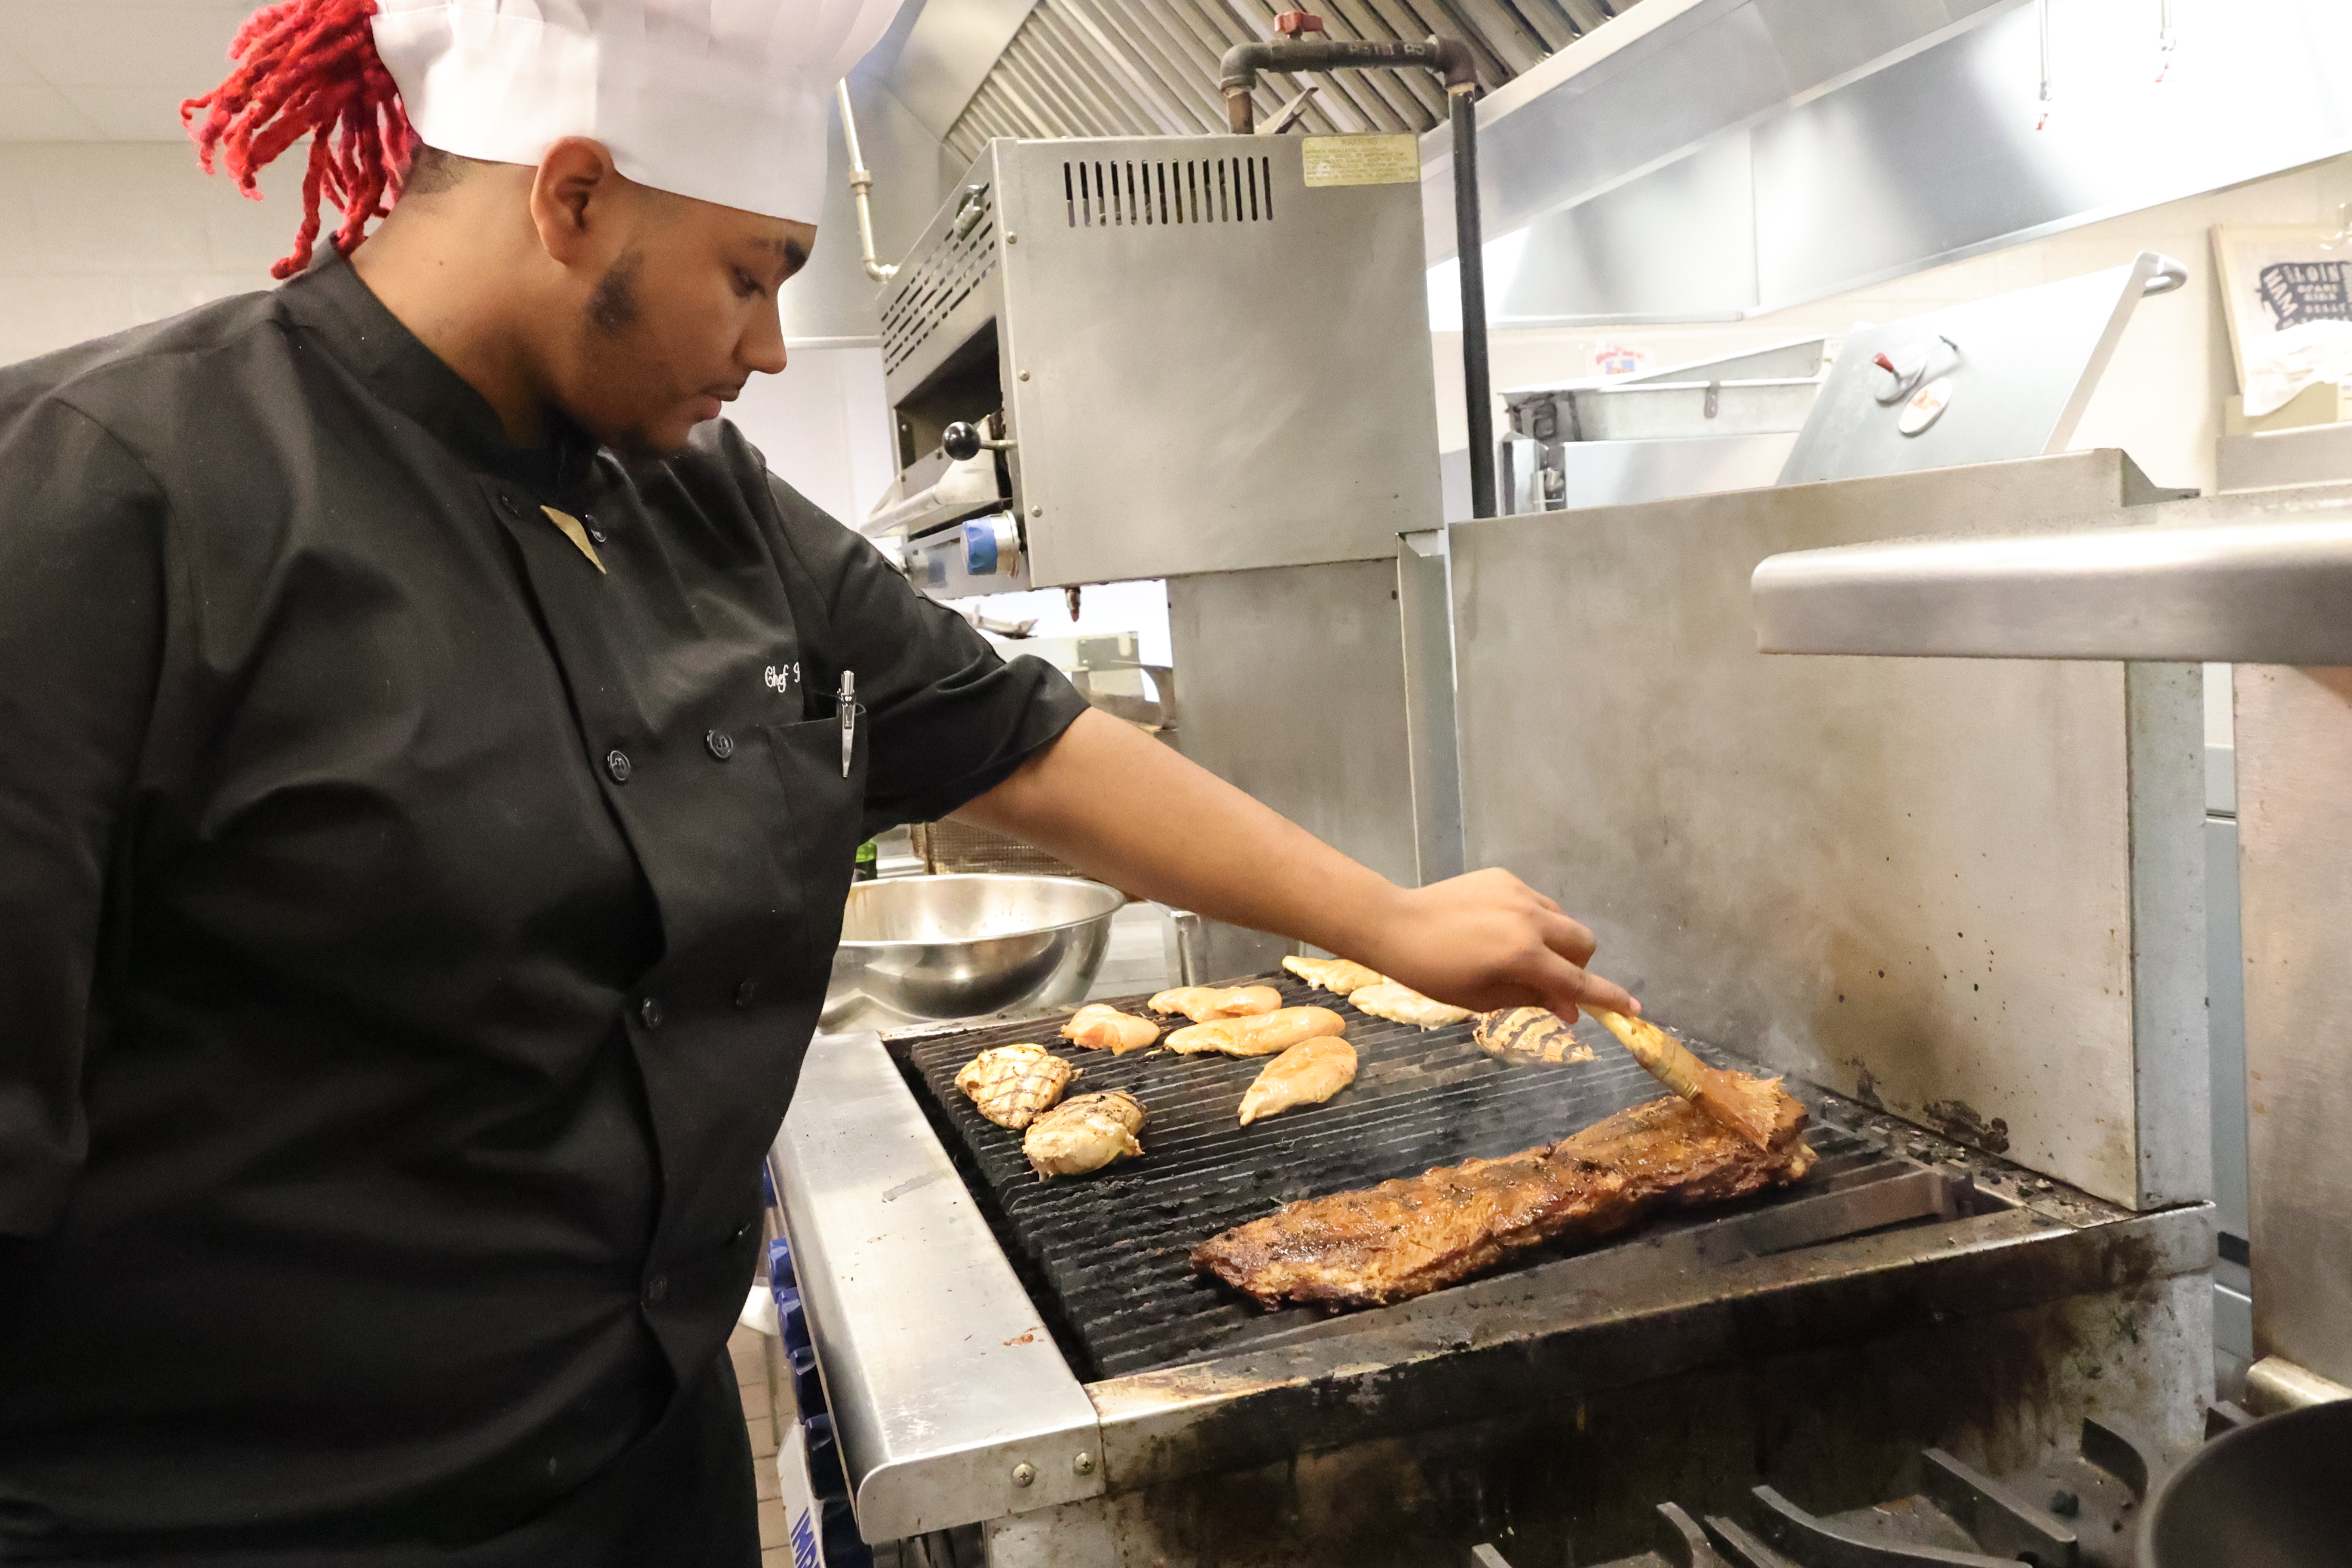 A Black male is basting a rack of ribs with barbeque sauce on the stove